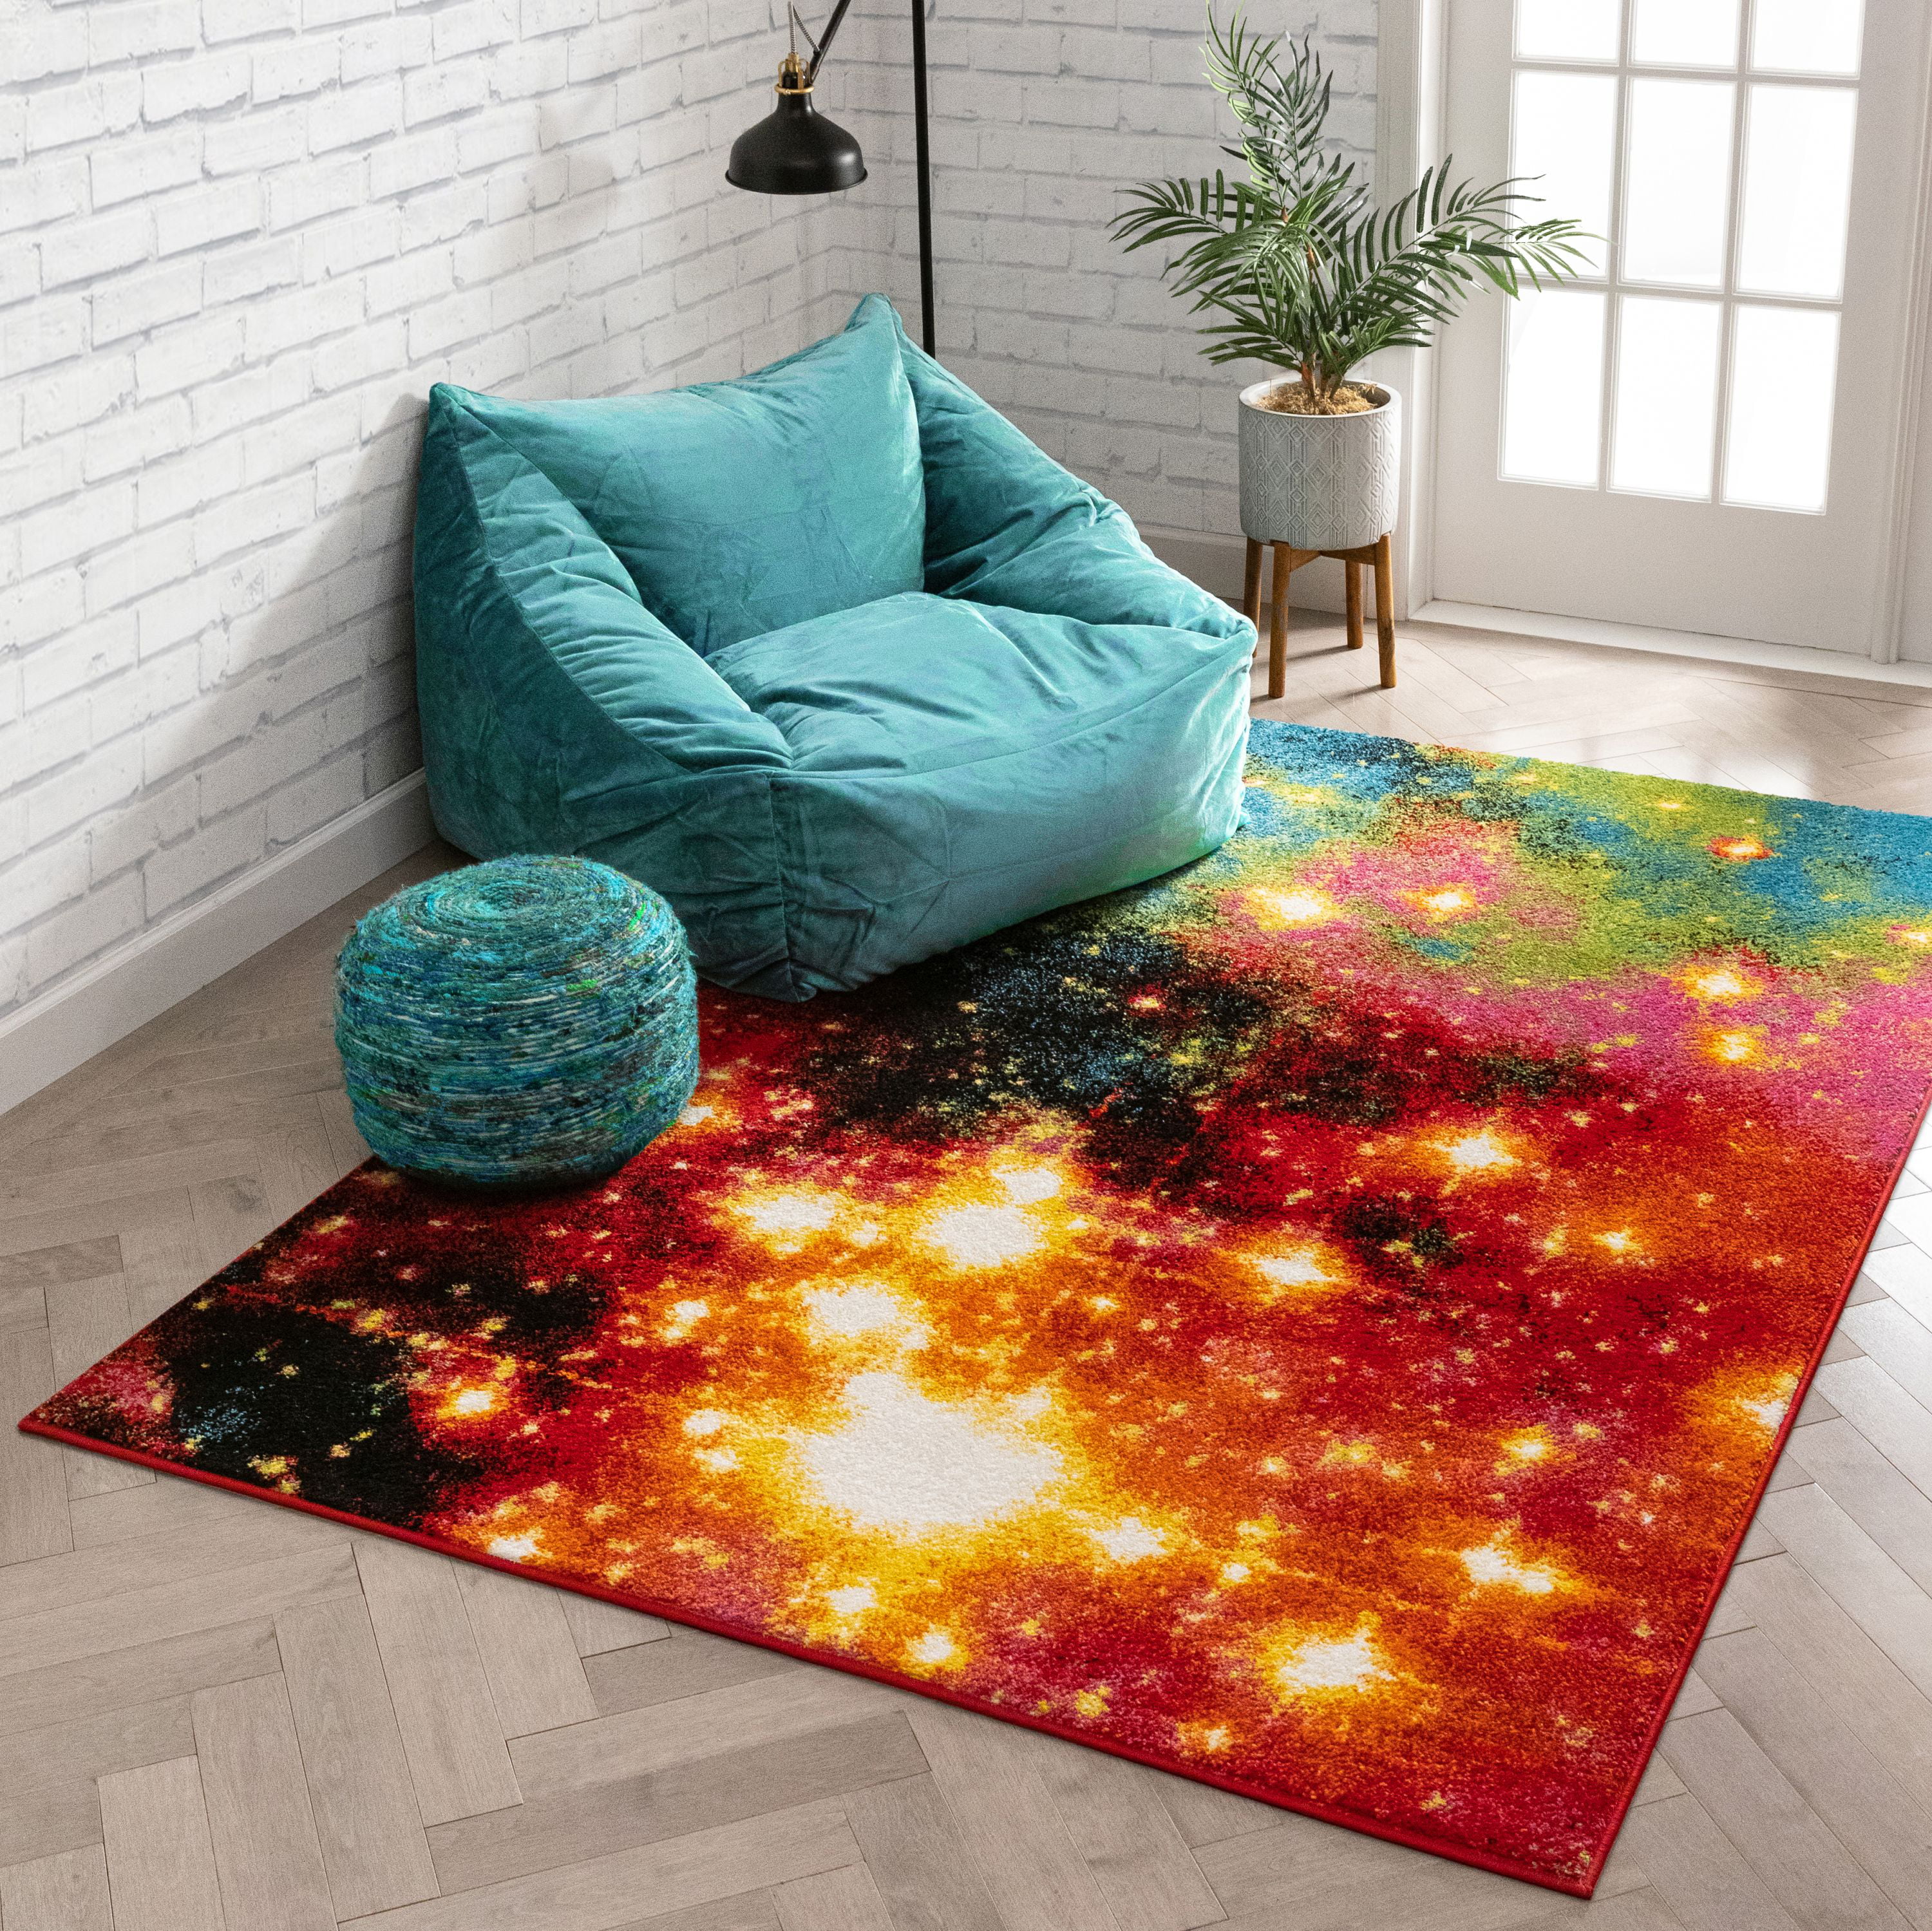 Well Woven Viva Destiny Multi Color, 8 215 10 Teal And Orange Area Rugs